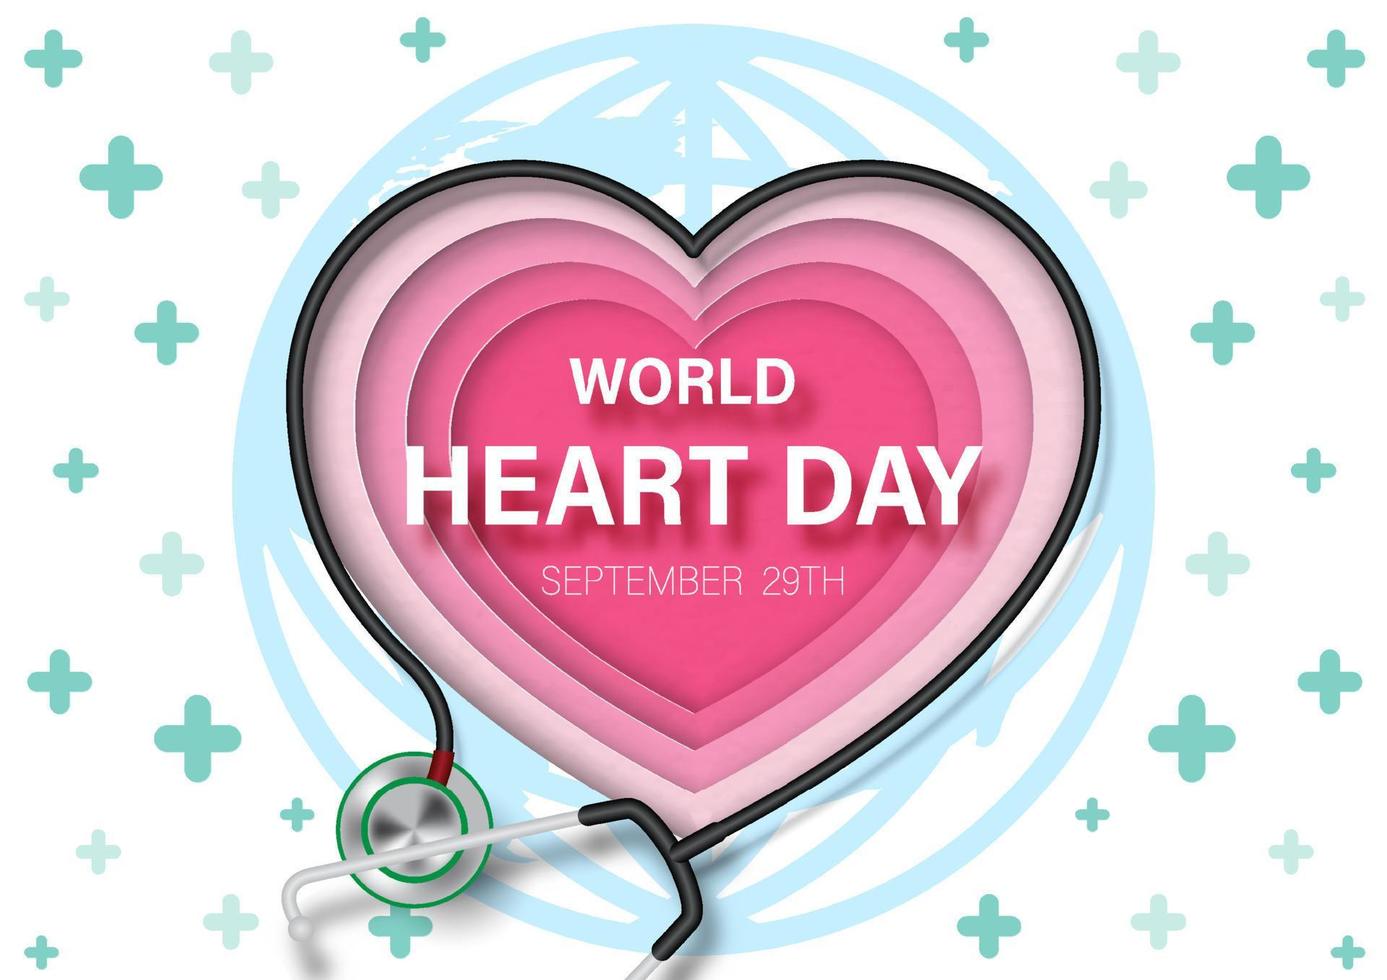 Doctor stethoscope make in a heart shape on pink heart in layers paper cut out style with World Heart Day lettering and green cross pattern and white background. vector